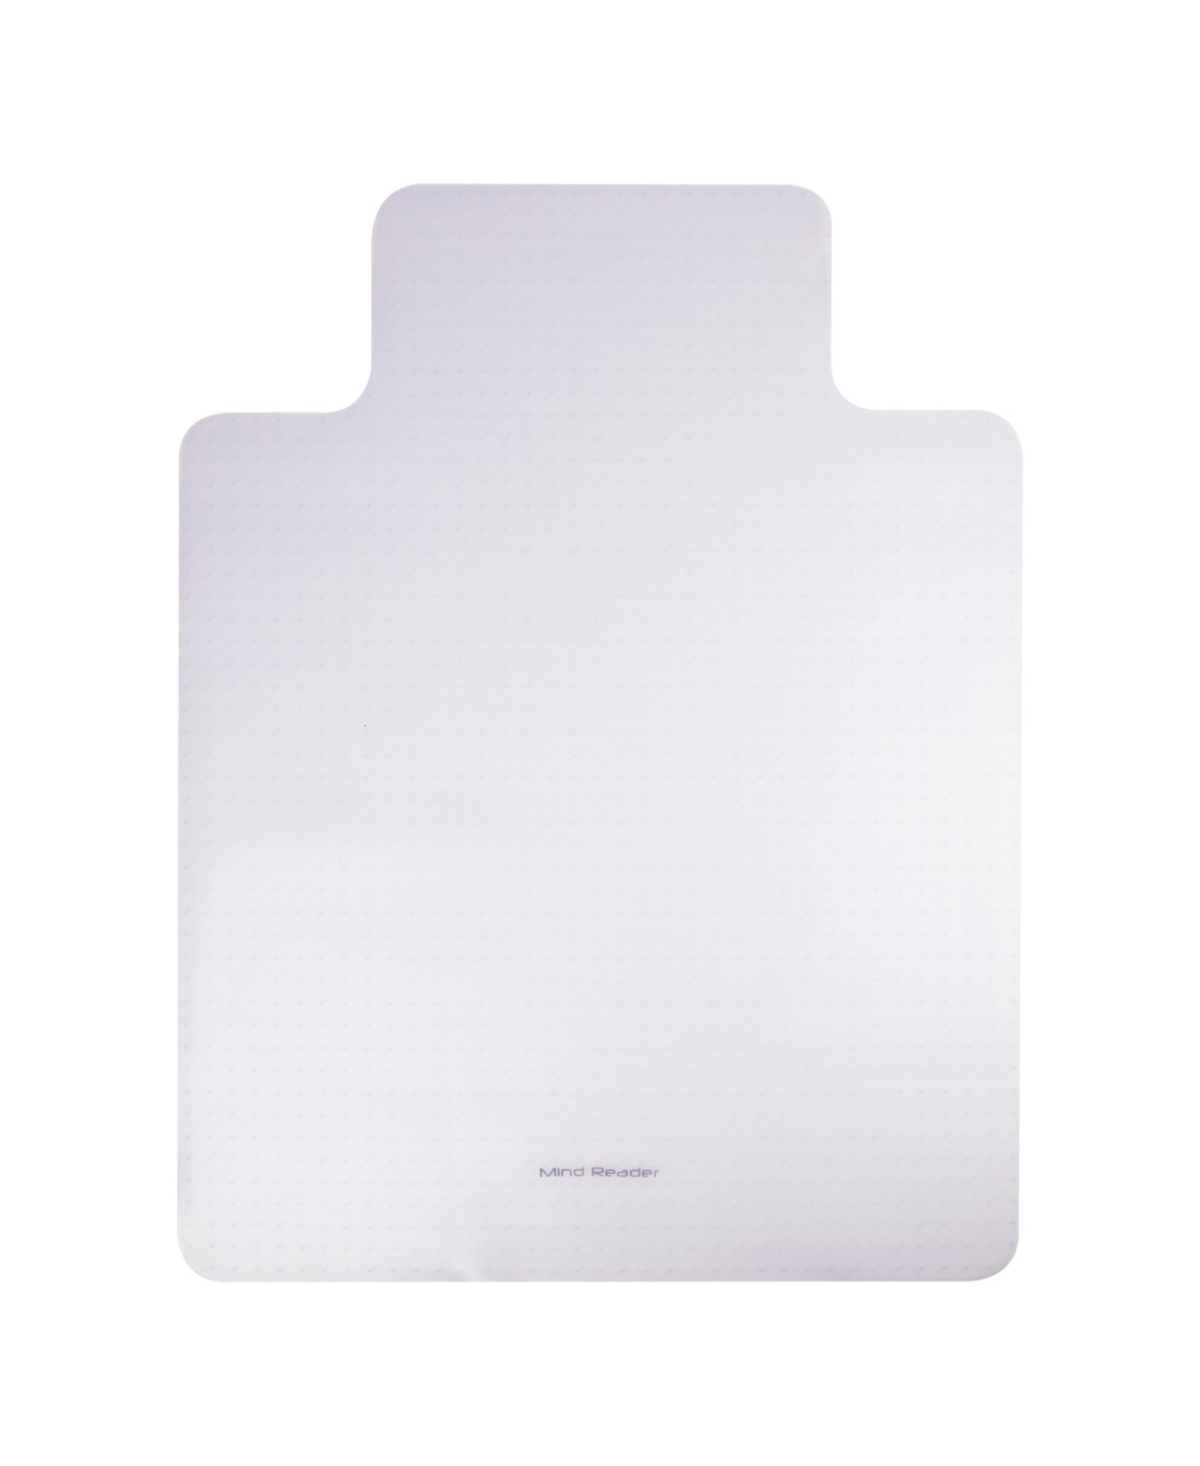 9-to-5 Collection, Office Chair Mat, Anti-Skid Floor Protector, 47.5"x 35.5", Set of 2 - Clear